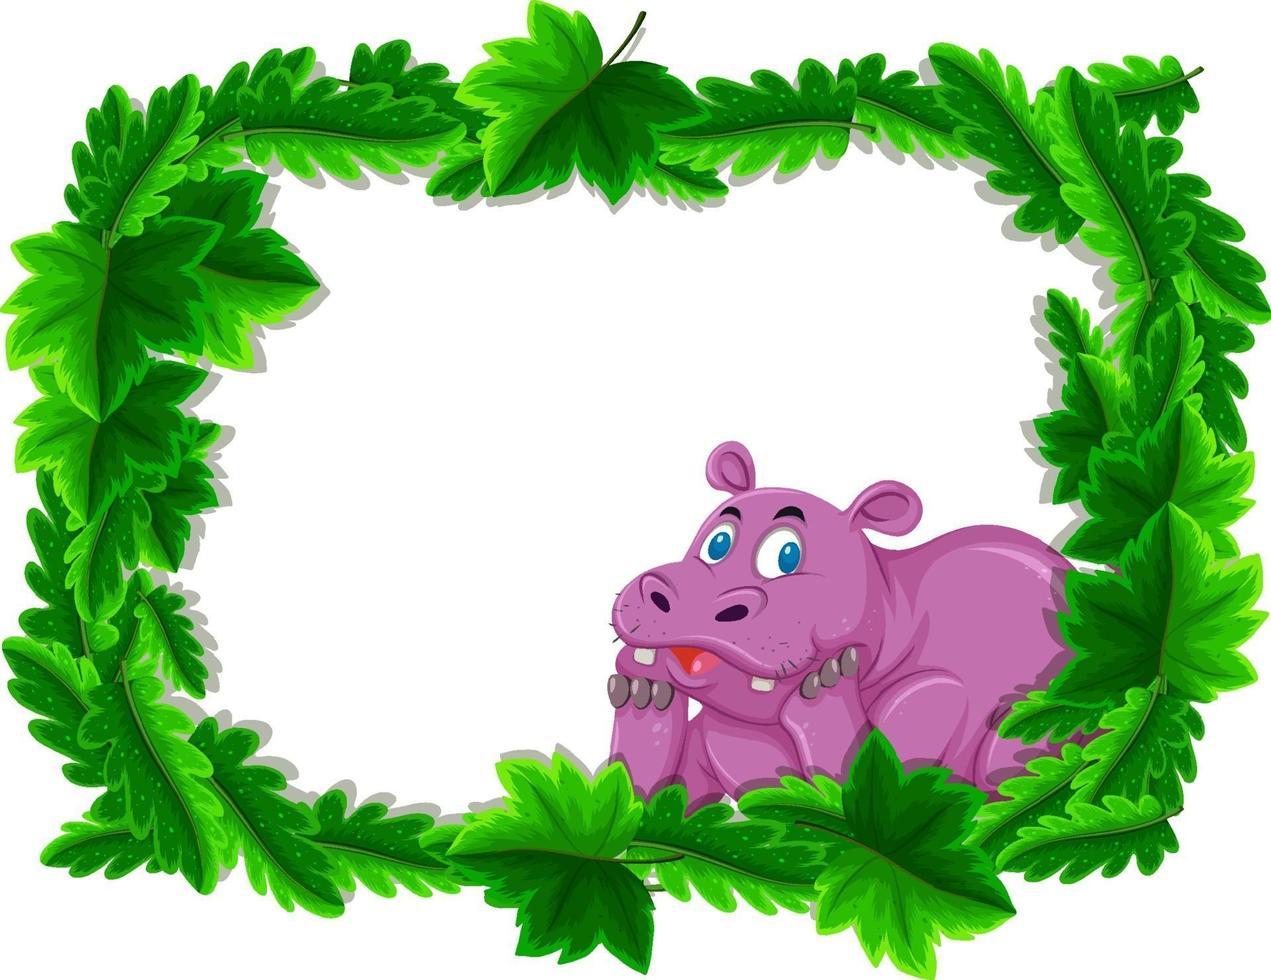 Empty banner with tropical leaves frame and hippopotamus cartoon character vector